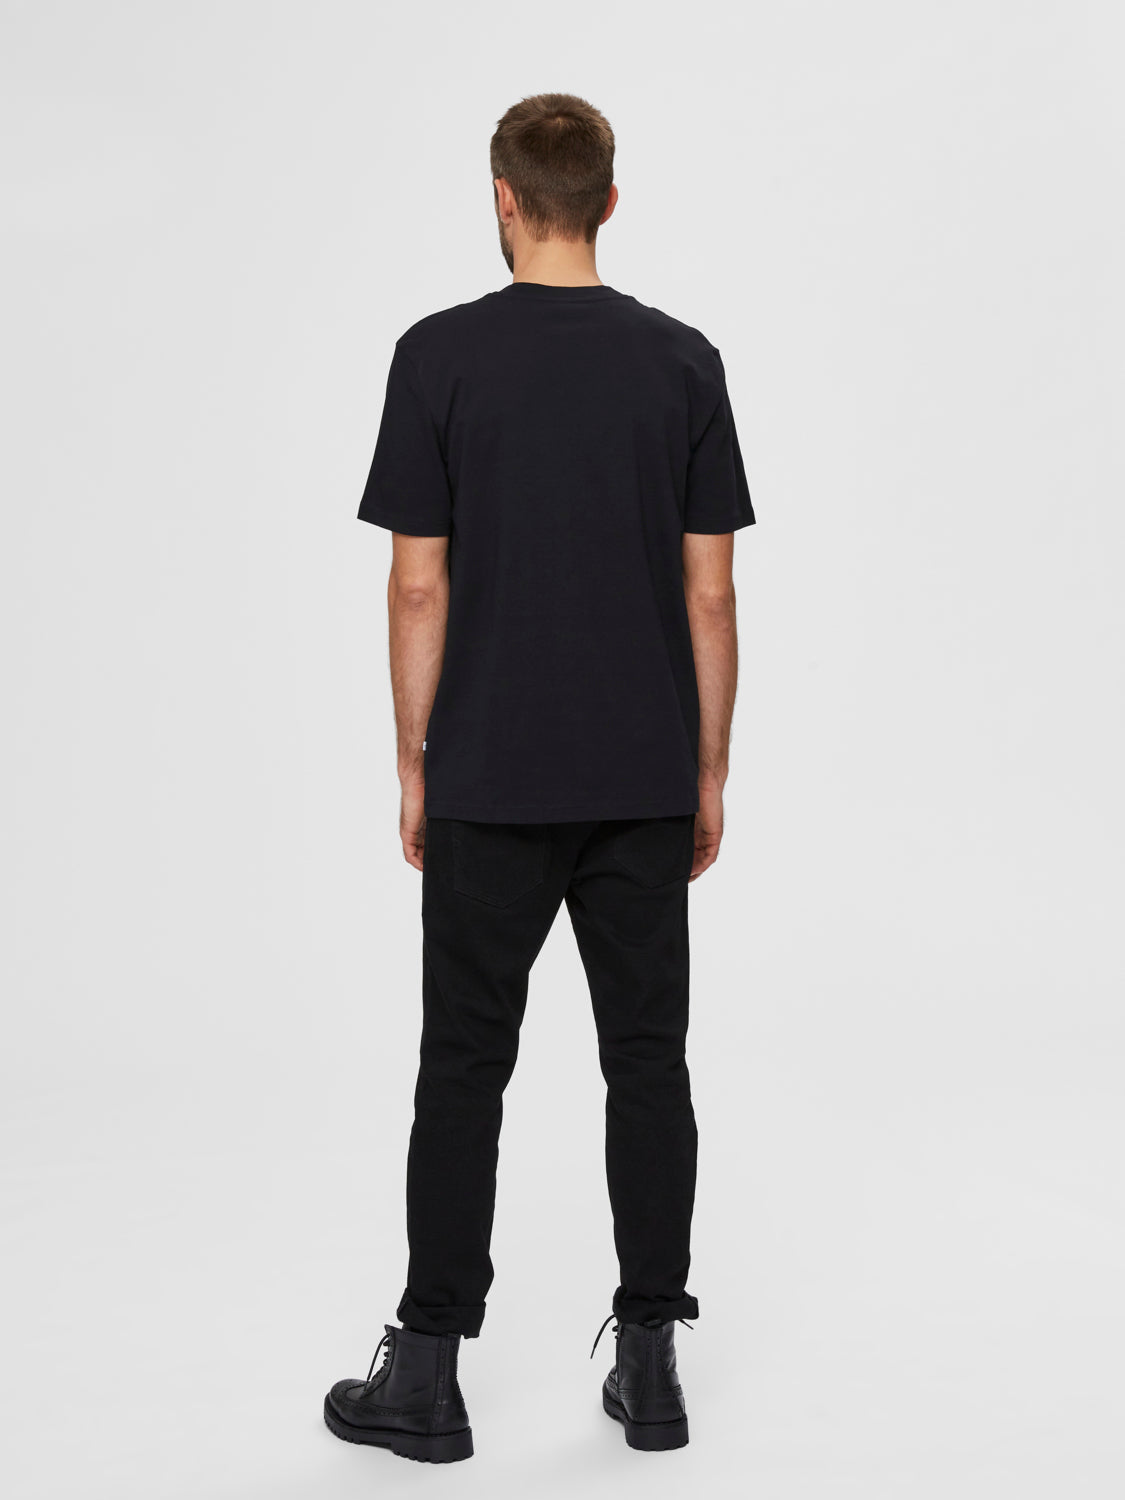 SELECTED HOMME - RELAX COLMAN 200 T-Shirt - Black